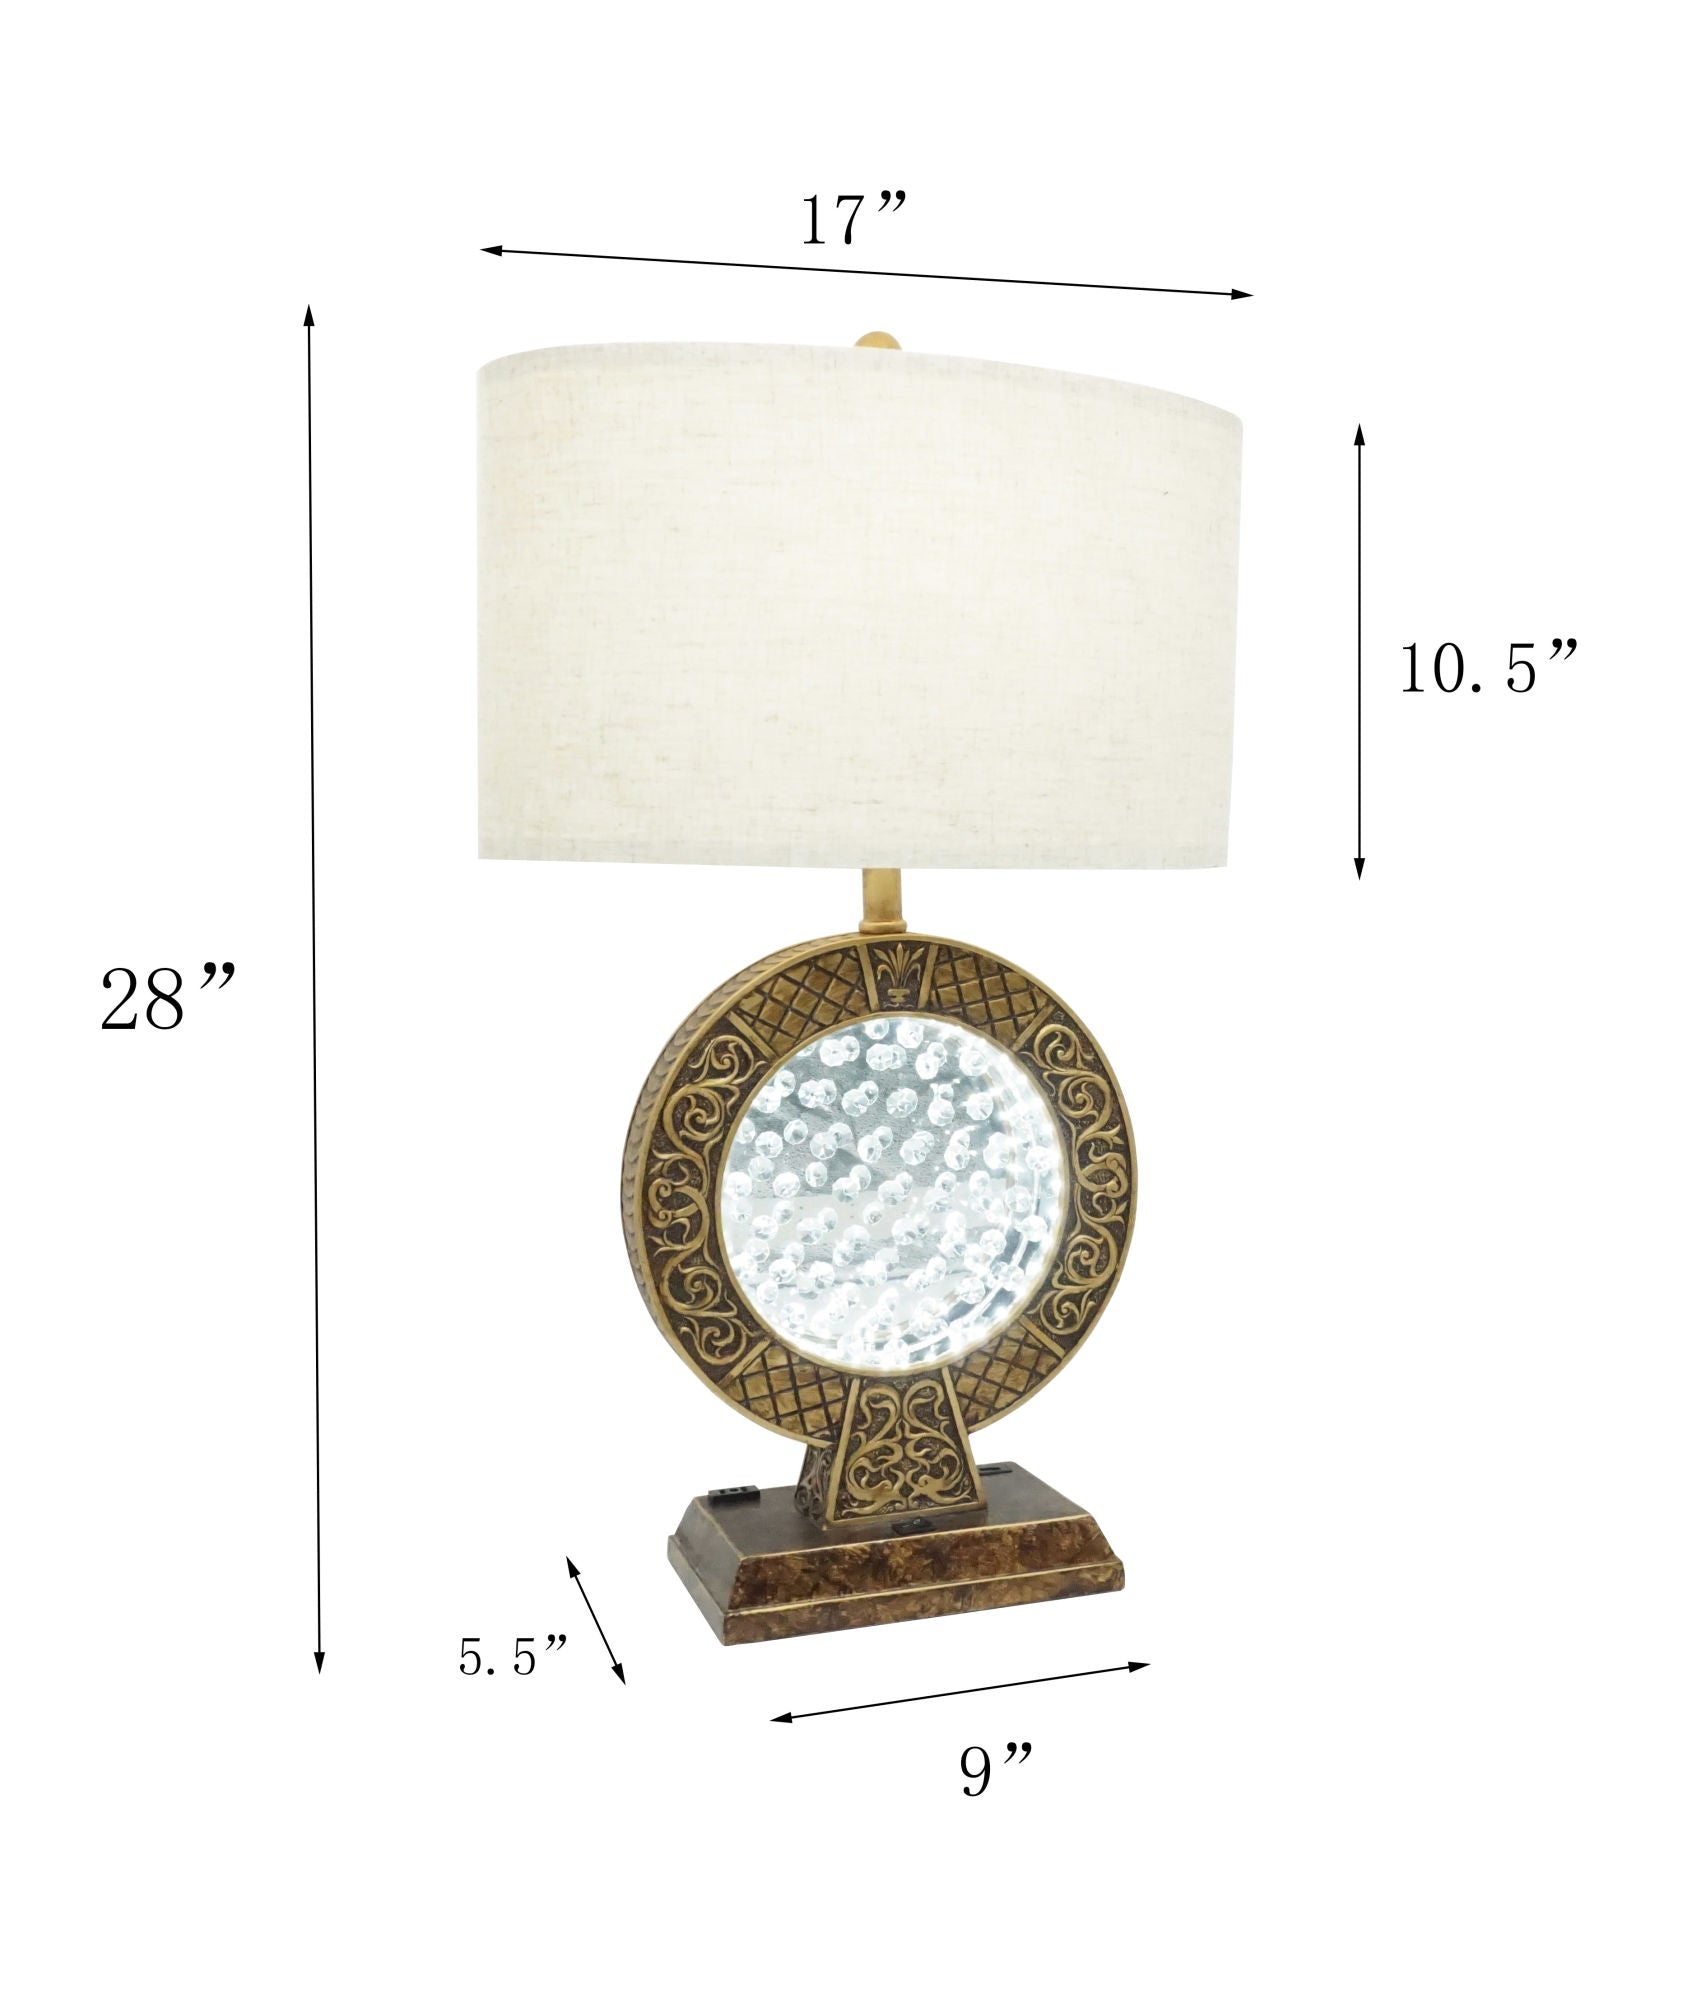 28" Antique polyresin Table Lamp, USB Port on Base with floating crystal decor on center